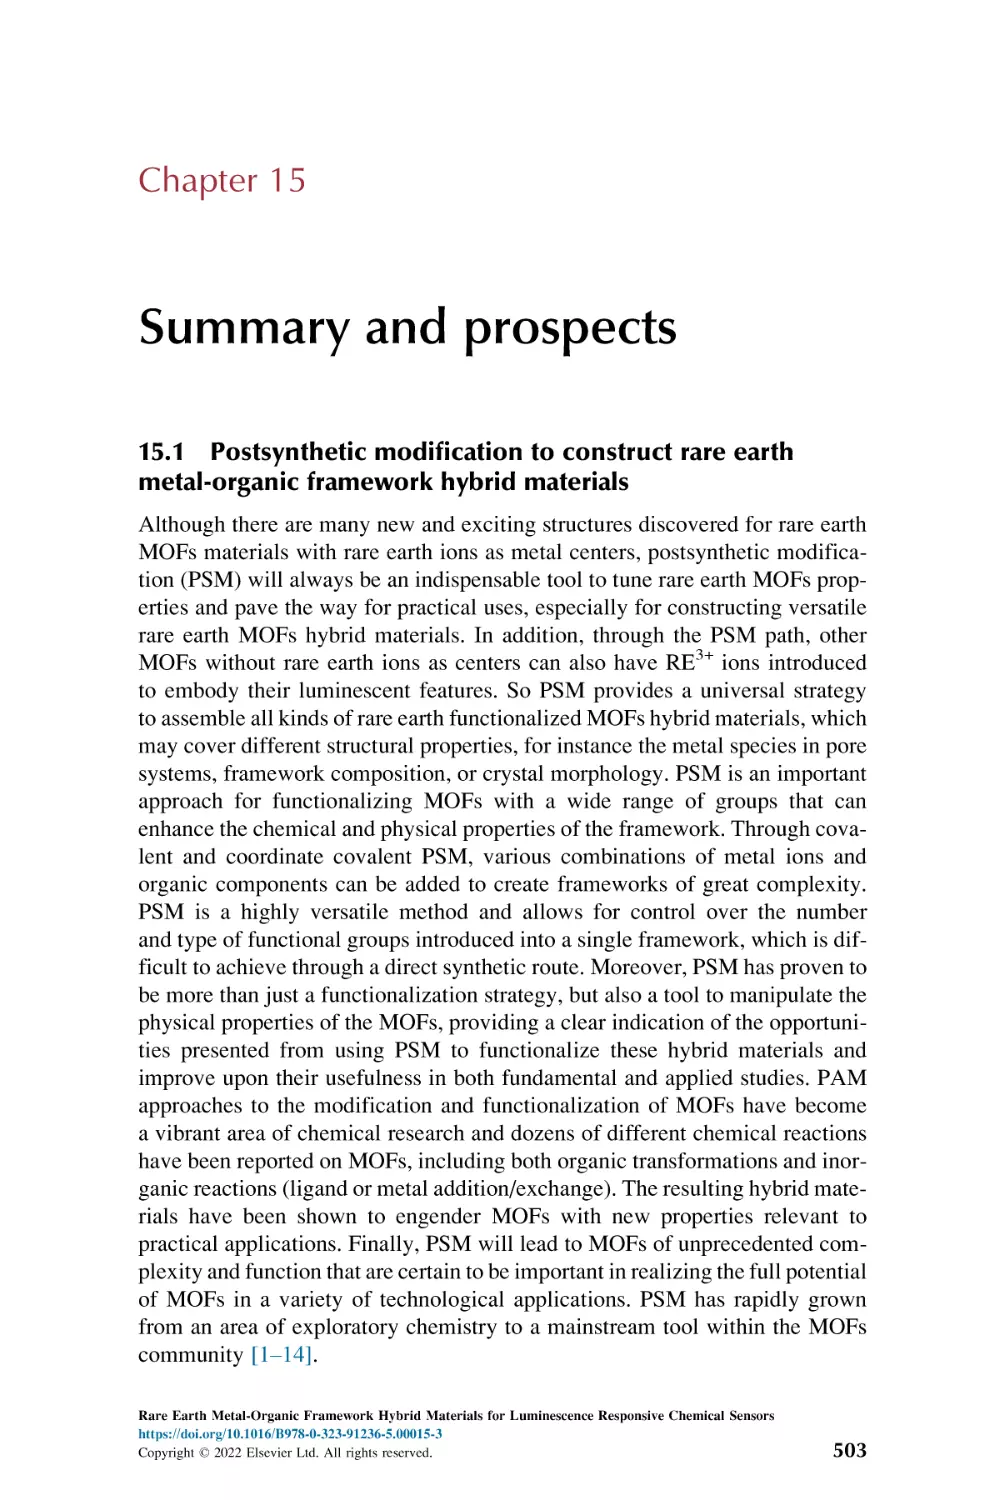 Chapter 15
15.1. Postsynthetic modification to construct rare earth metal-organic framework hybrid materials